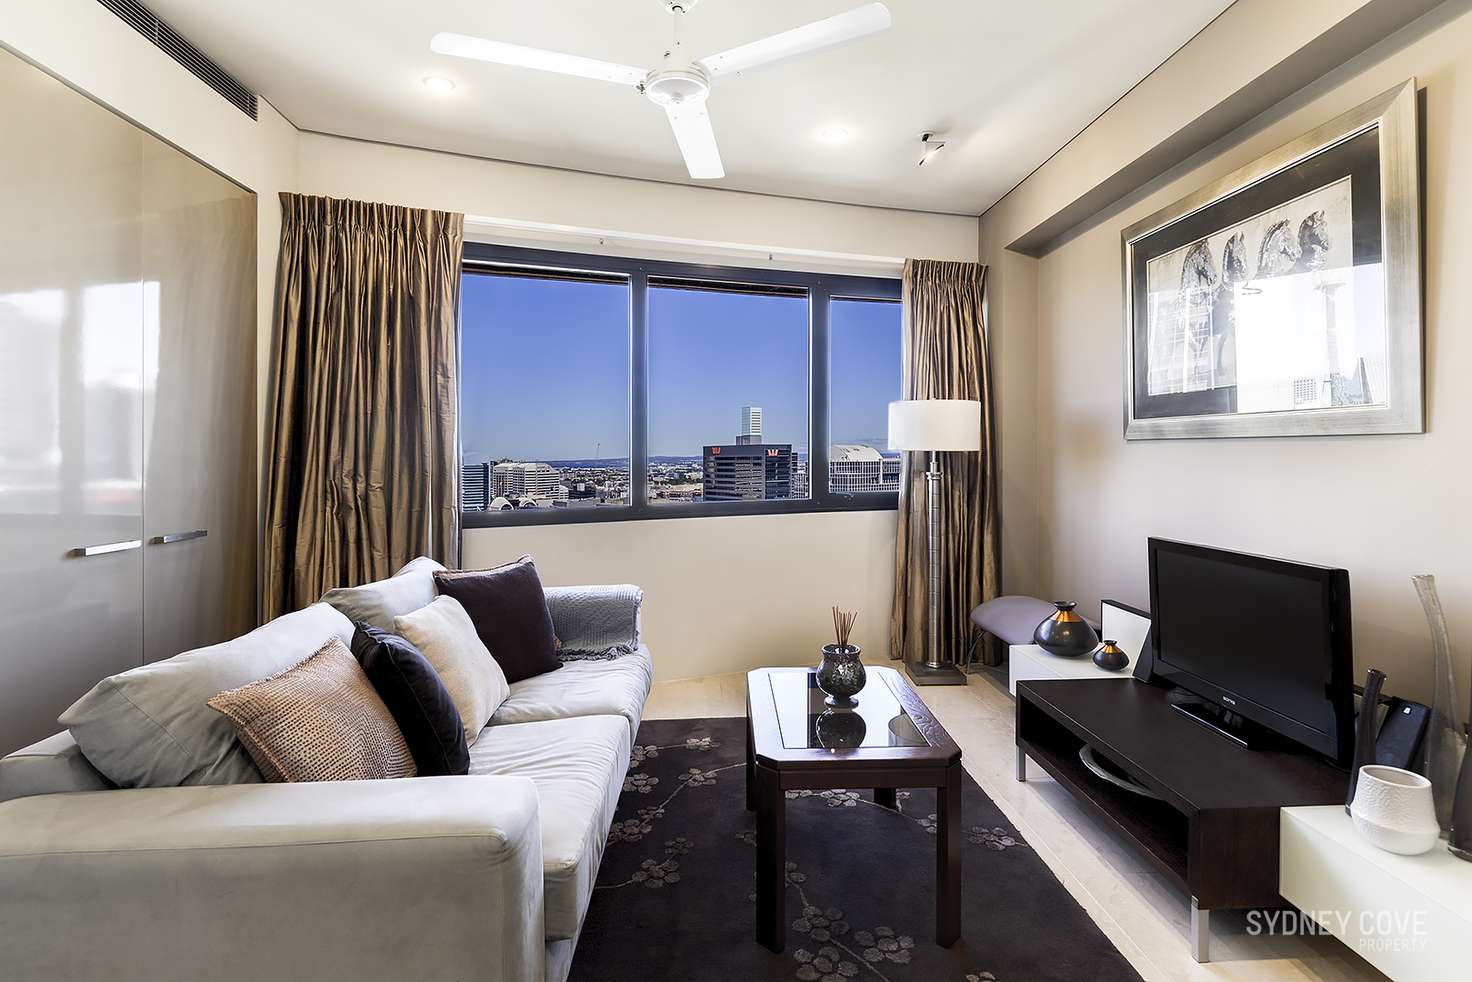 Main view of Homely apartment listing, 129 Harrington St, Sydney NSW 2000